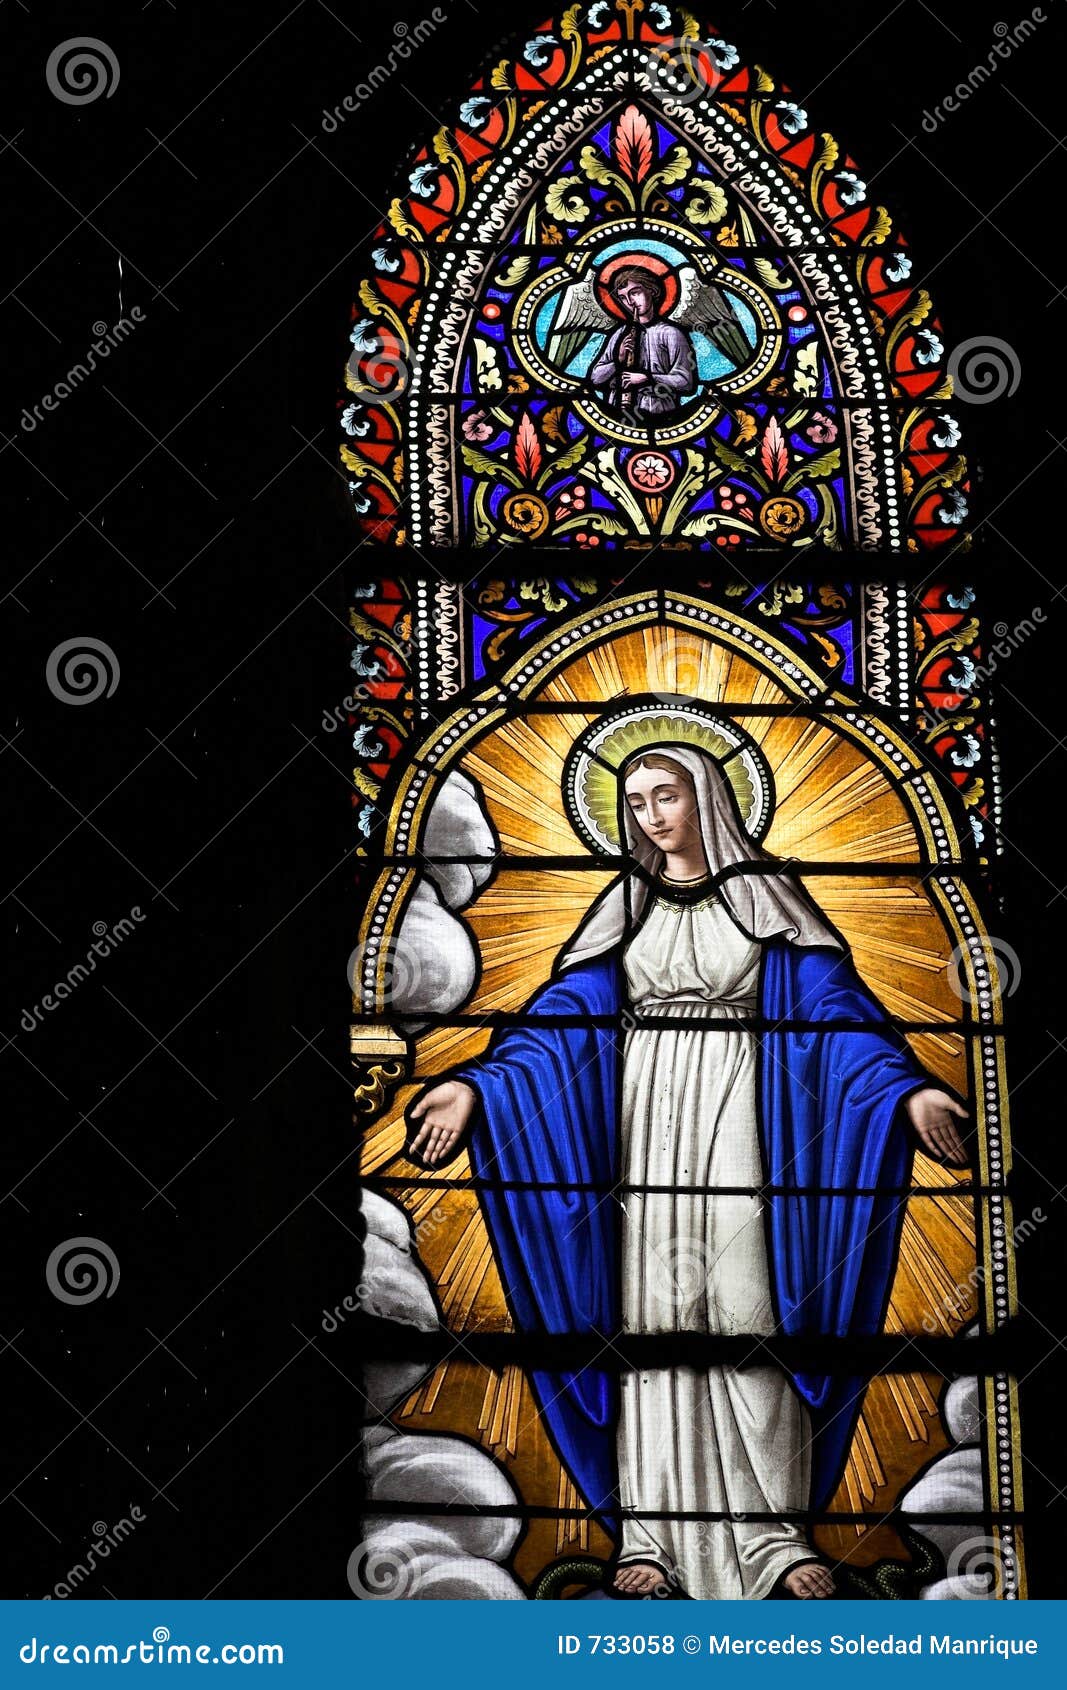 Stained-glass Windows With Images Of Saints | CartoonDealer.com #240636524